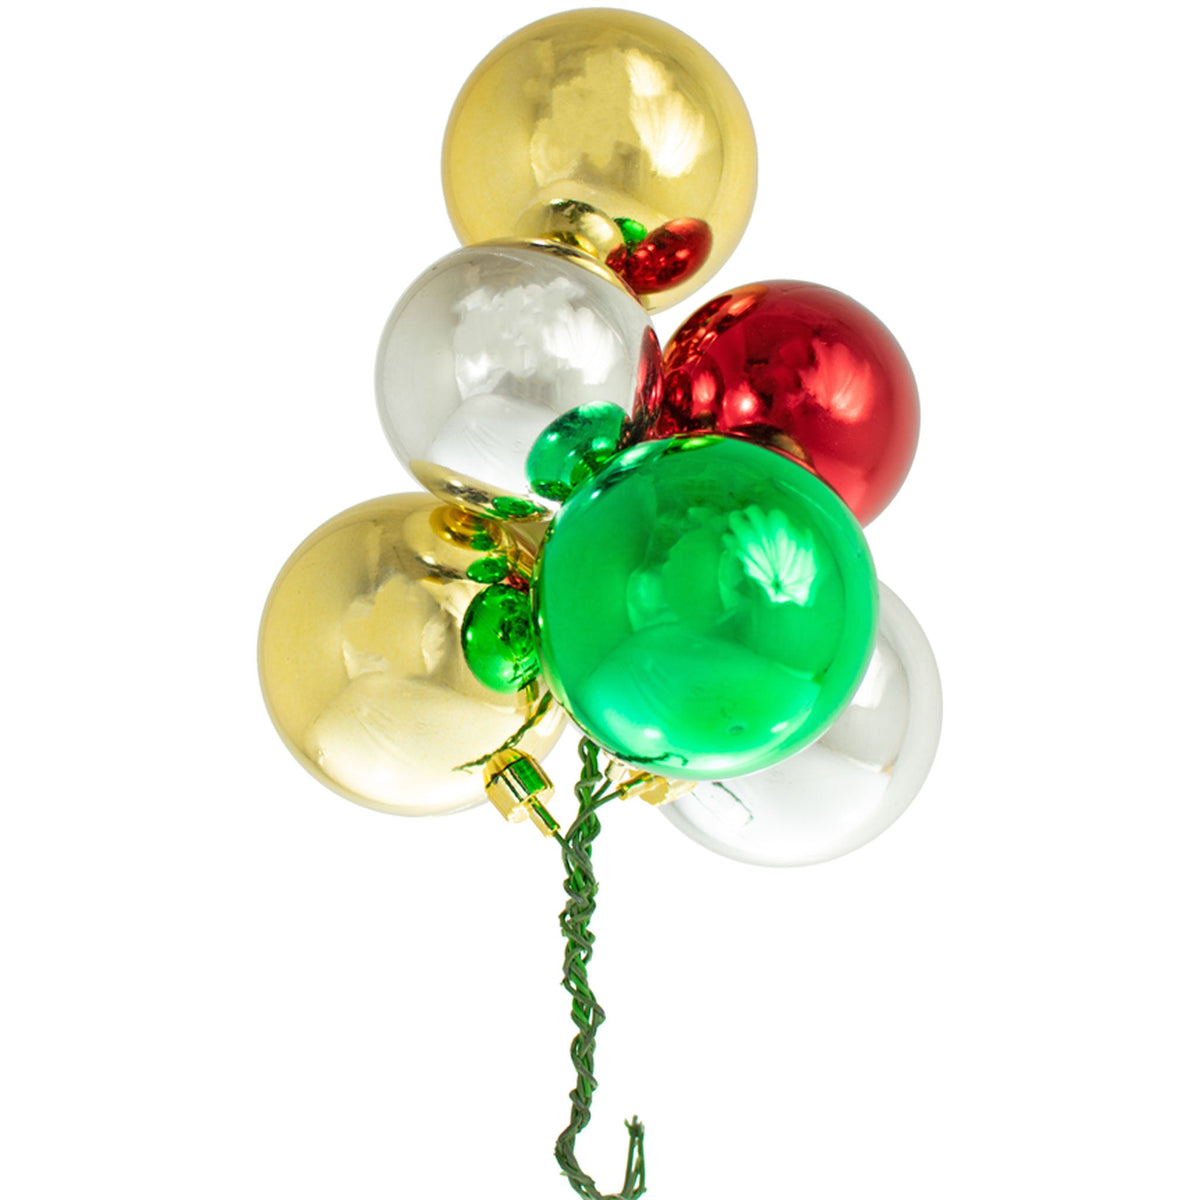 Colors include:  2 - Shiny Gold Ball Ornaments (70MM) 2 - Shiny Silver Ball Ornaments (70MM & 60MM) 1 - Matte Silver Ball Ornament (50MM) 1 - Shiny Green Ball Ornament (70MM) 1 - Shiny Red Ball Ornament (60MM)